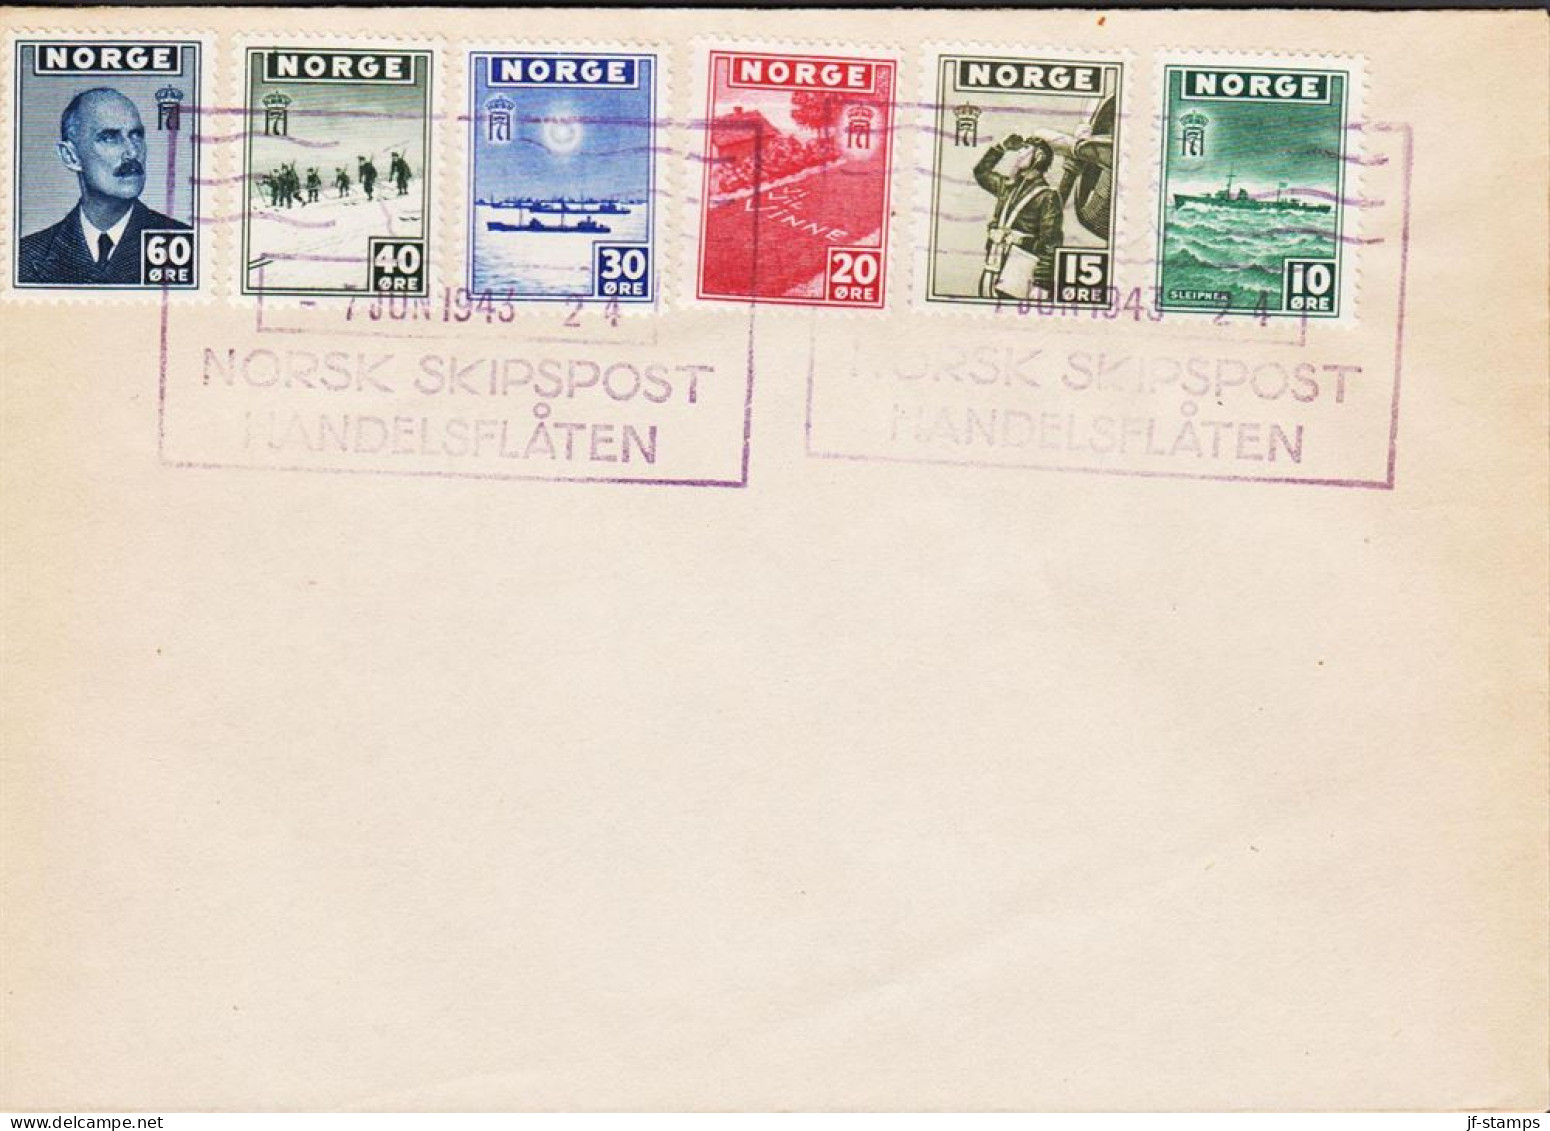 1943. NORGE. Fine Envelope With 10, 15, 20, 30 40 And 60 ØRE London Issue Cancelled With ... (Michel 278-283) - JF545678 - Briefe U. Dokumente